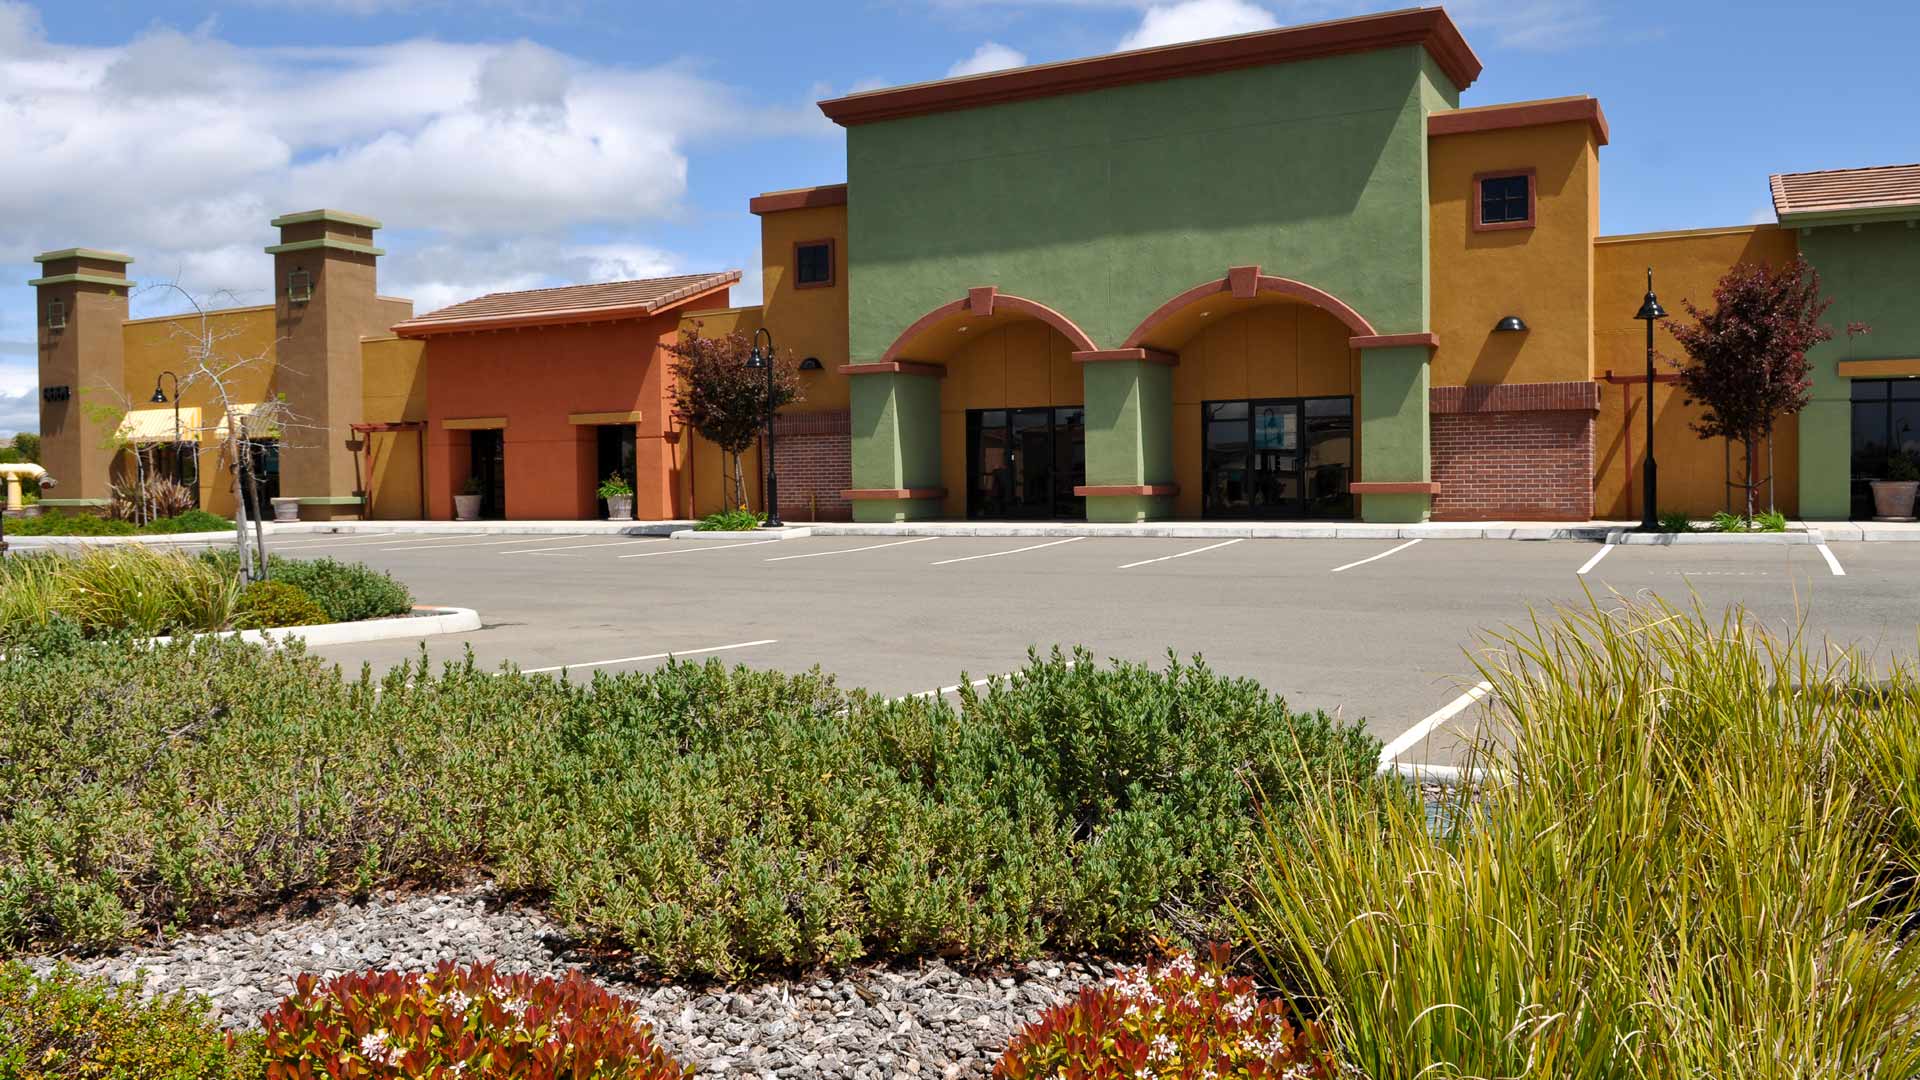 A commercial property's landscape maintained by professionals in Las Cruces, NM.